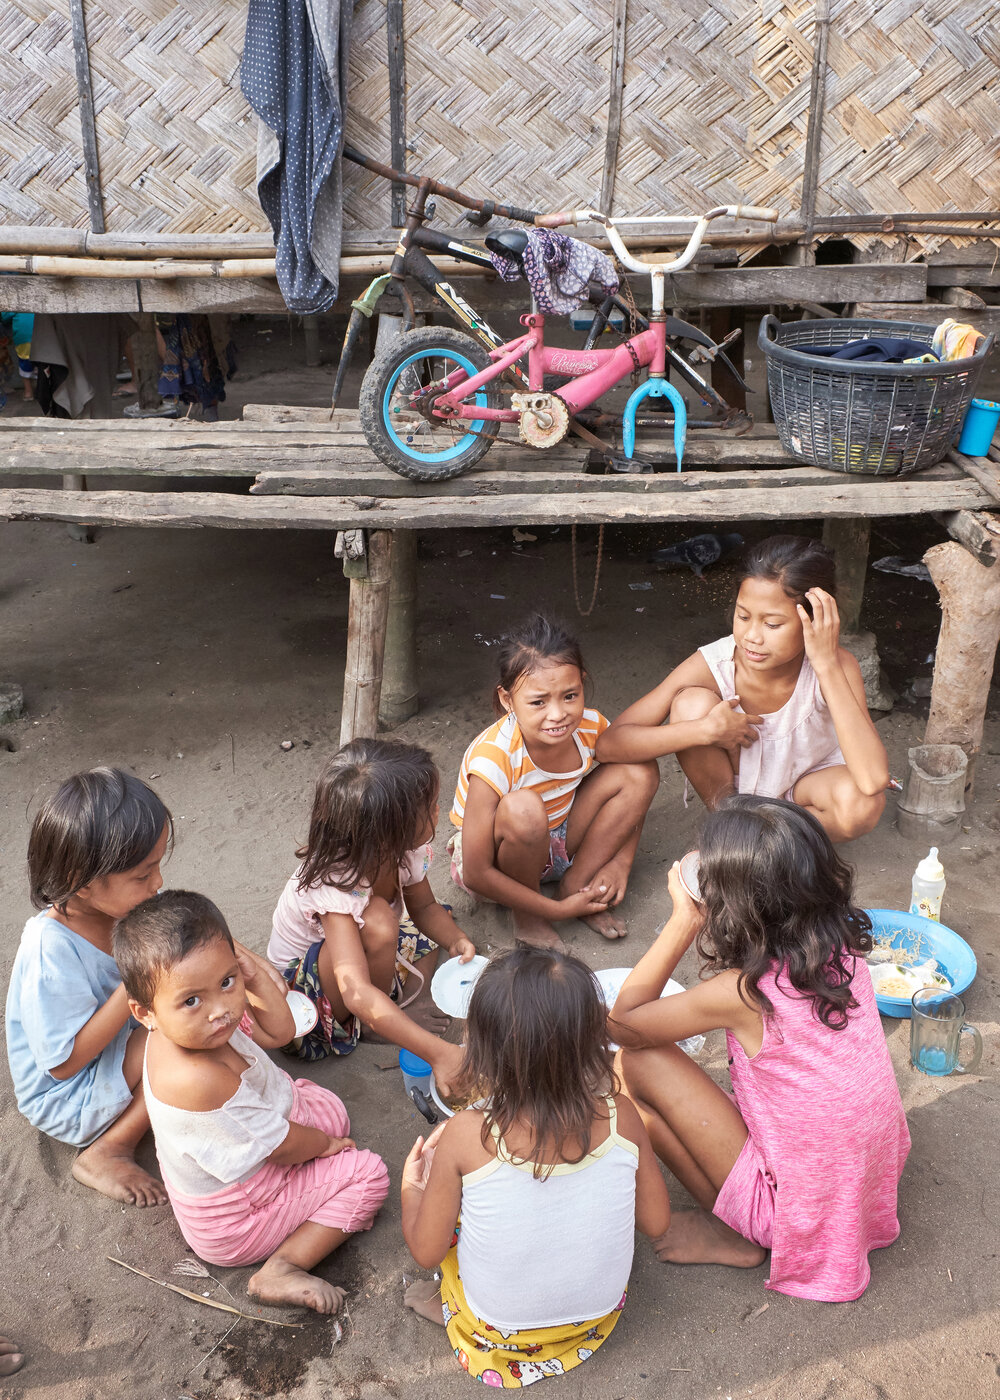  Children sitting on the dirt and eating outside a nipa hut. Barra, Philippines. 